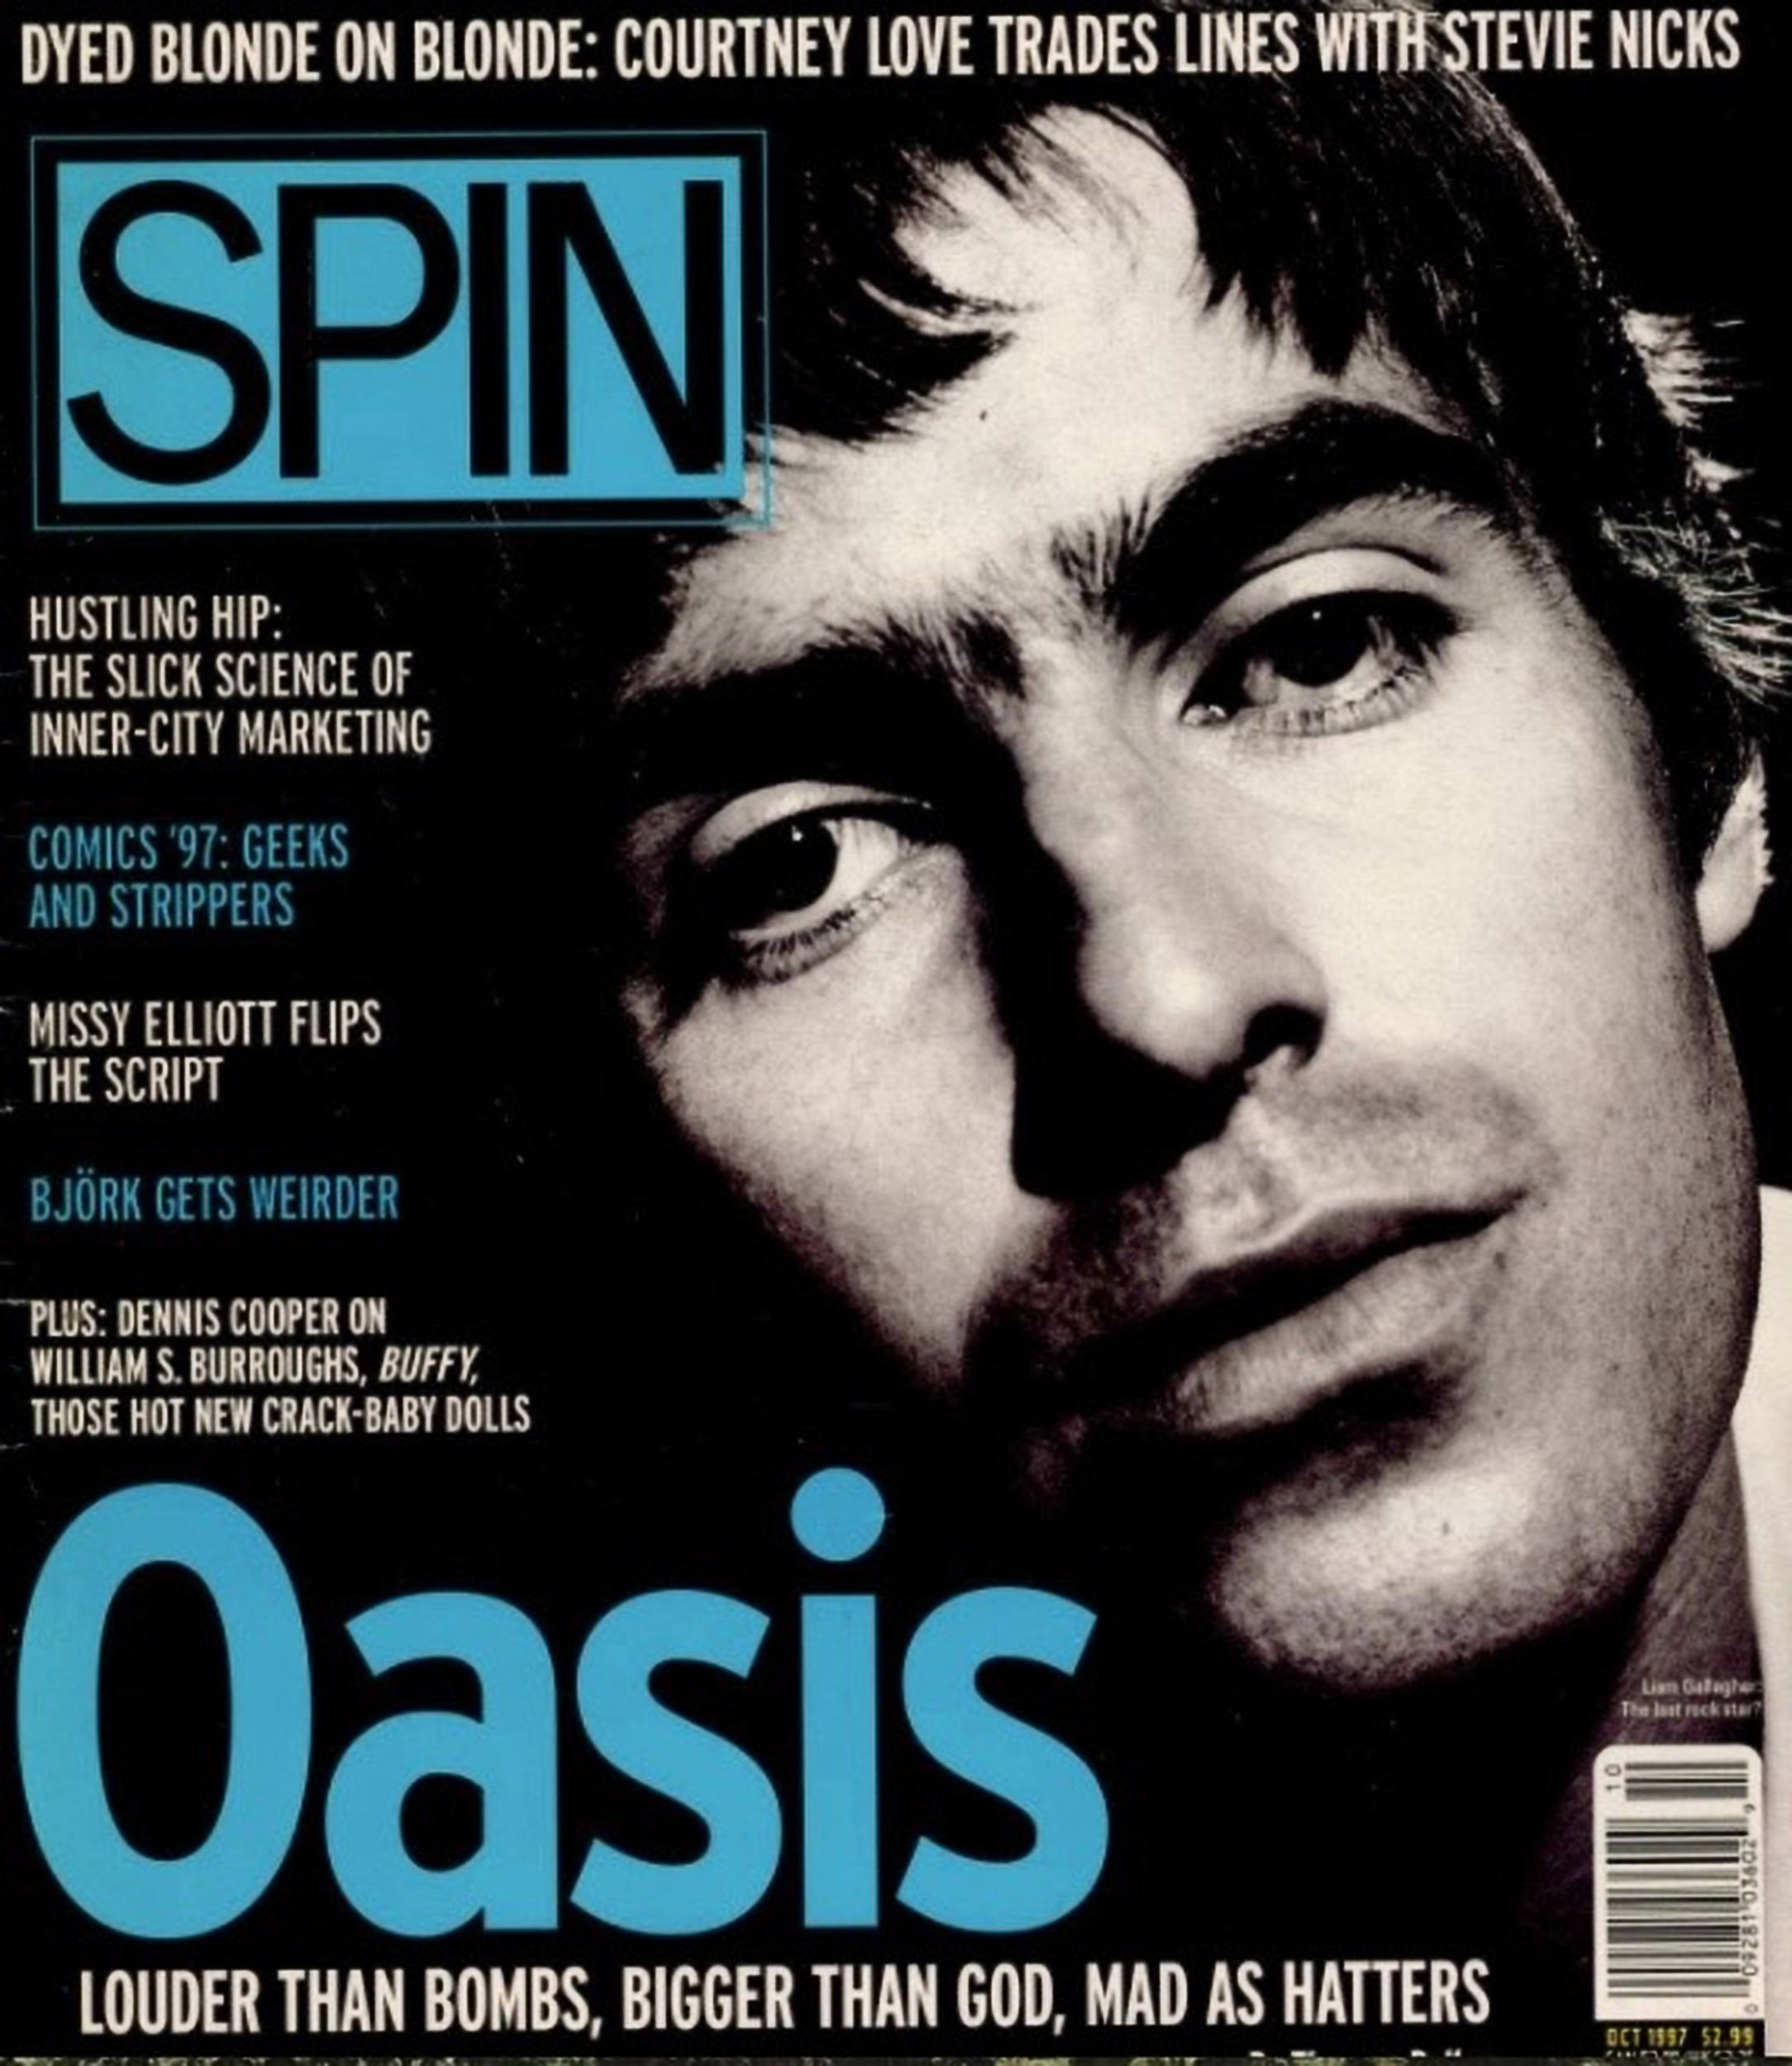 Oasis on the cover of Spin, October 1997